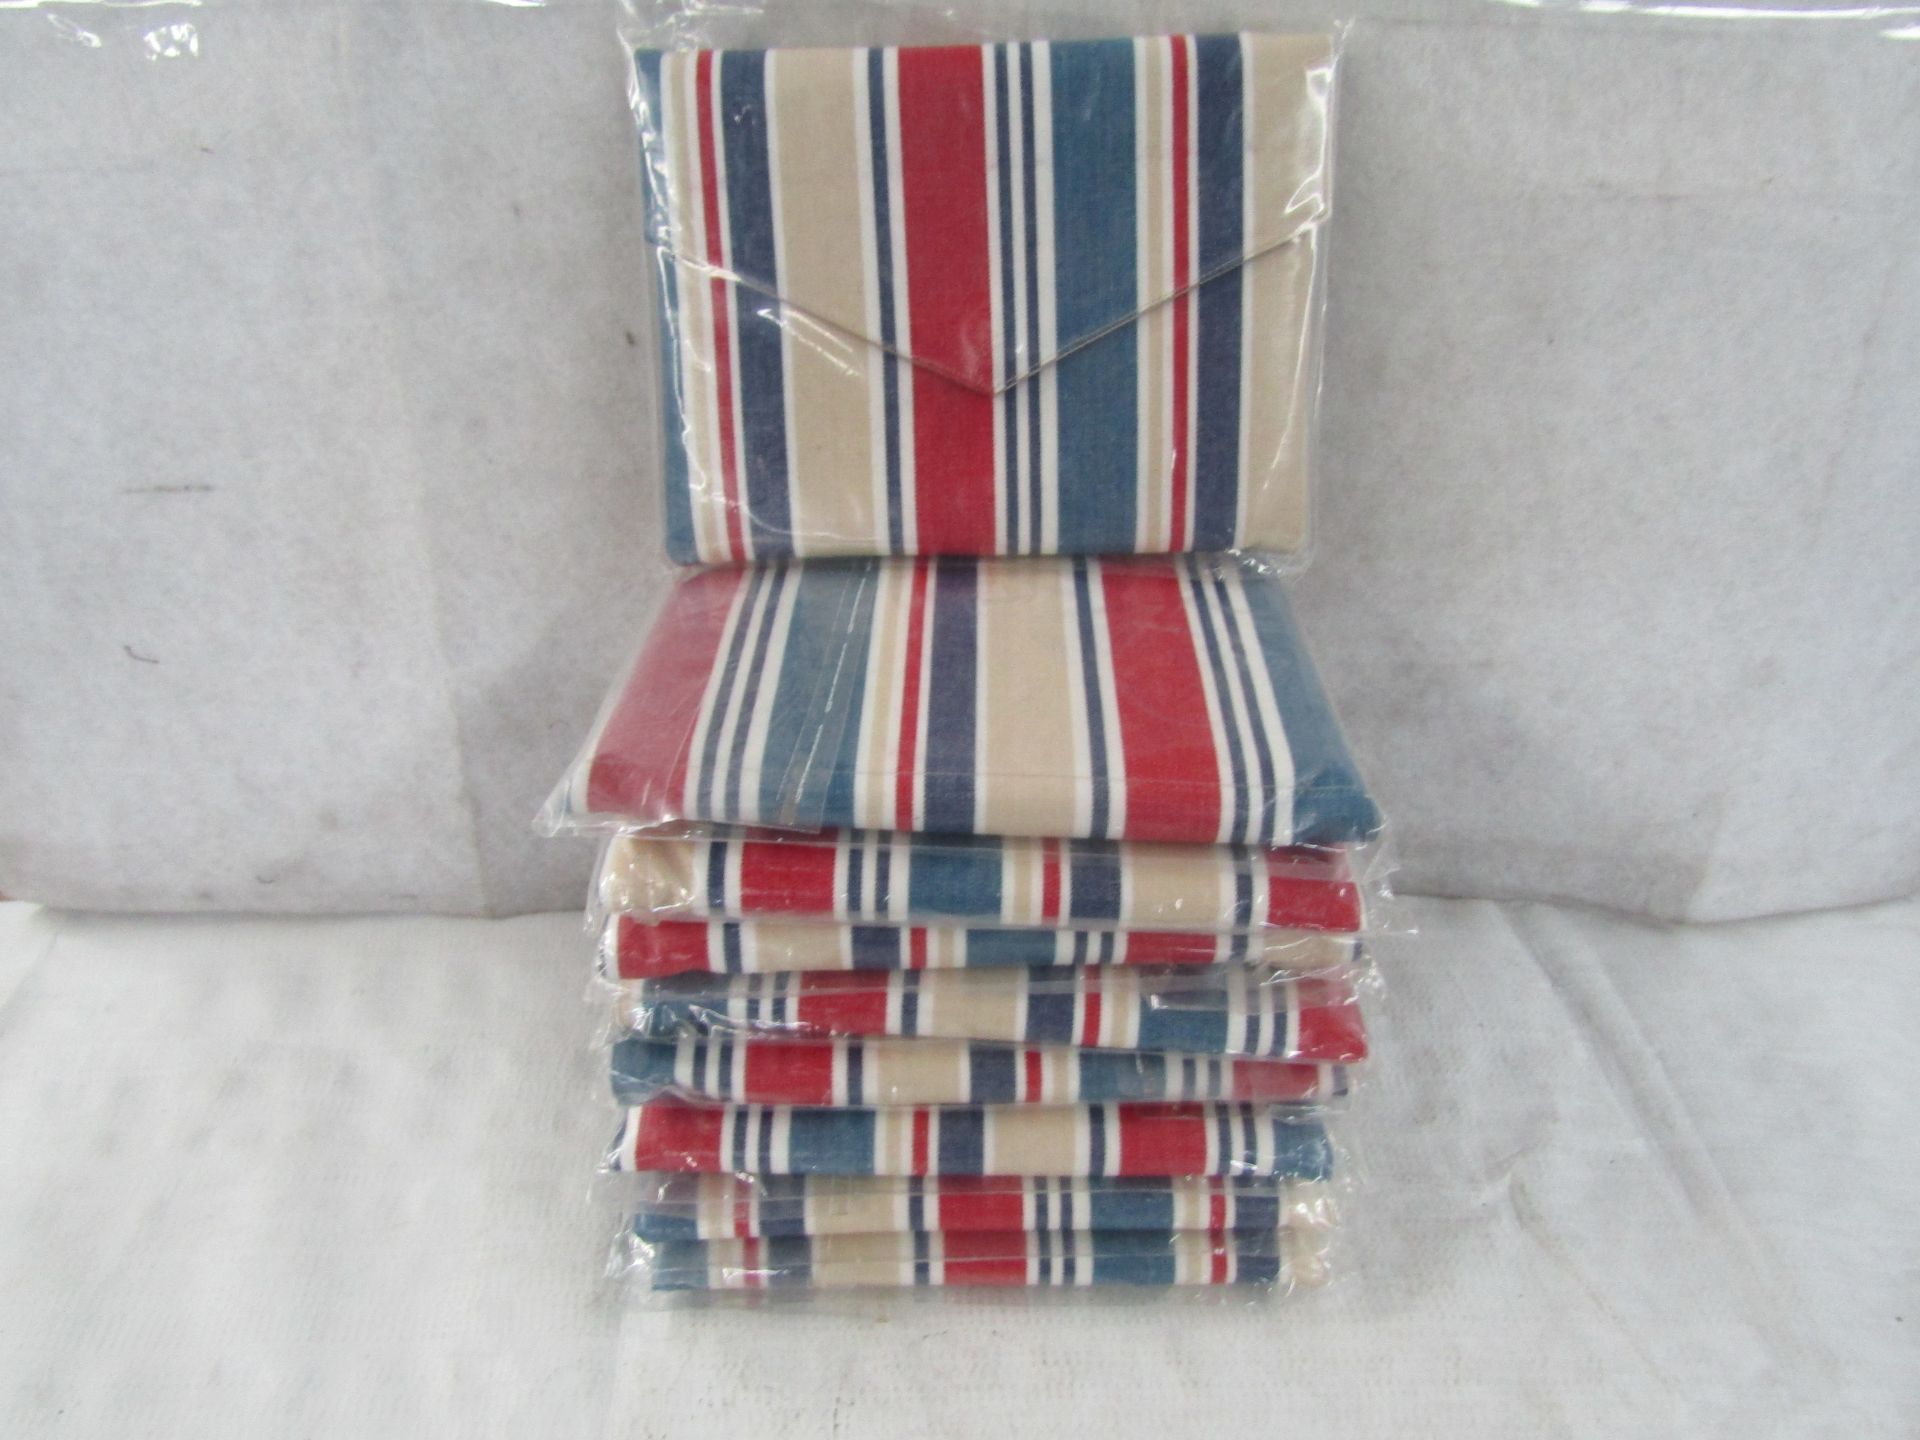 8X TheStripesCompany - PVC Clutch Purse Small - See Image For Design - New & Packaged.